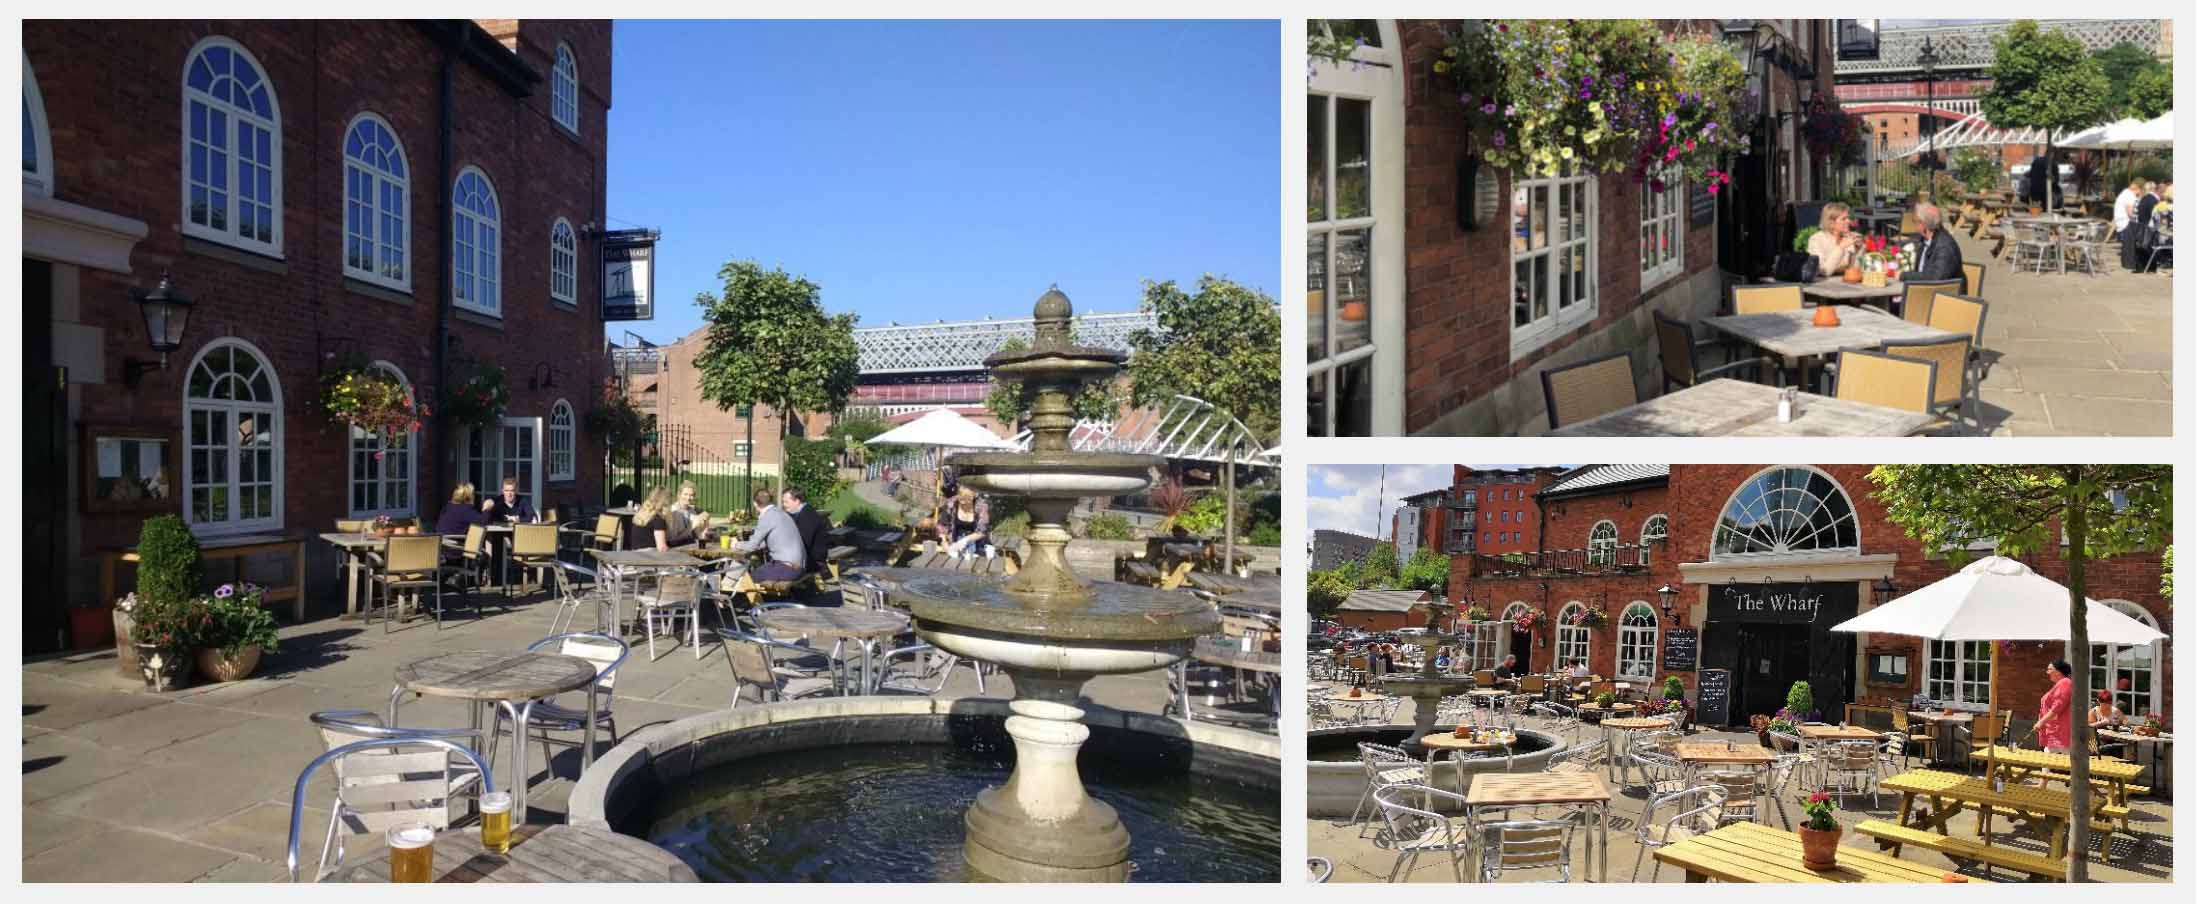 Best Beer Gardens in Manchester - The Wharf